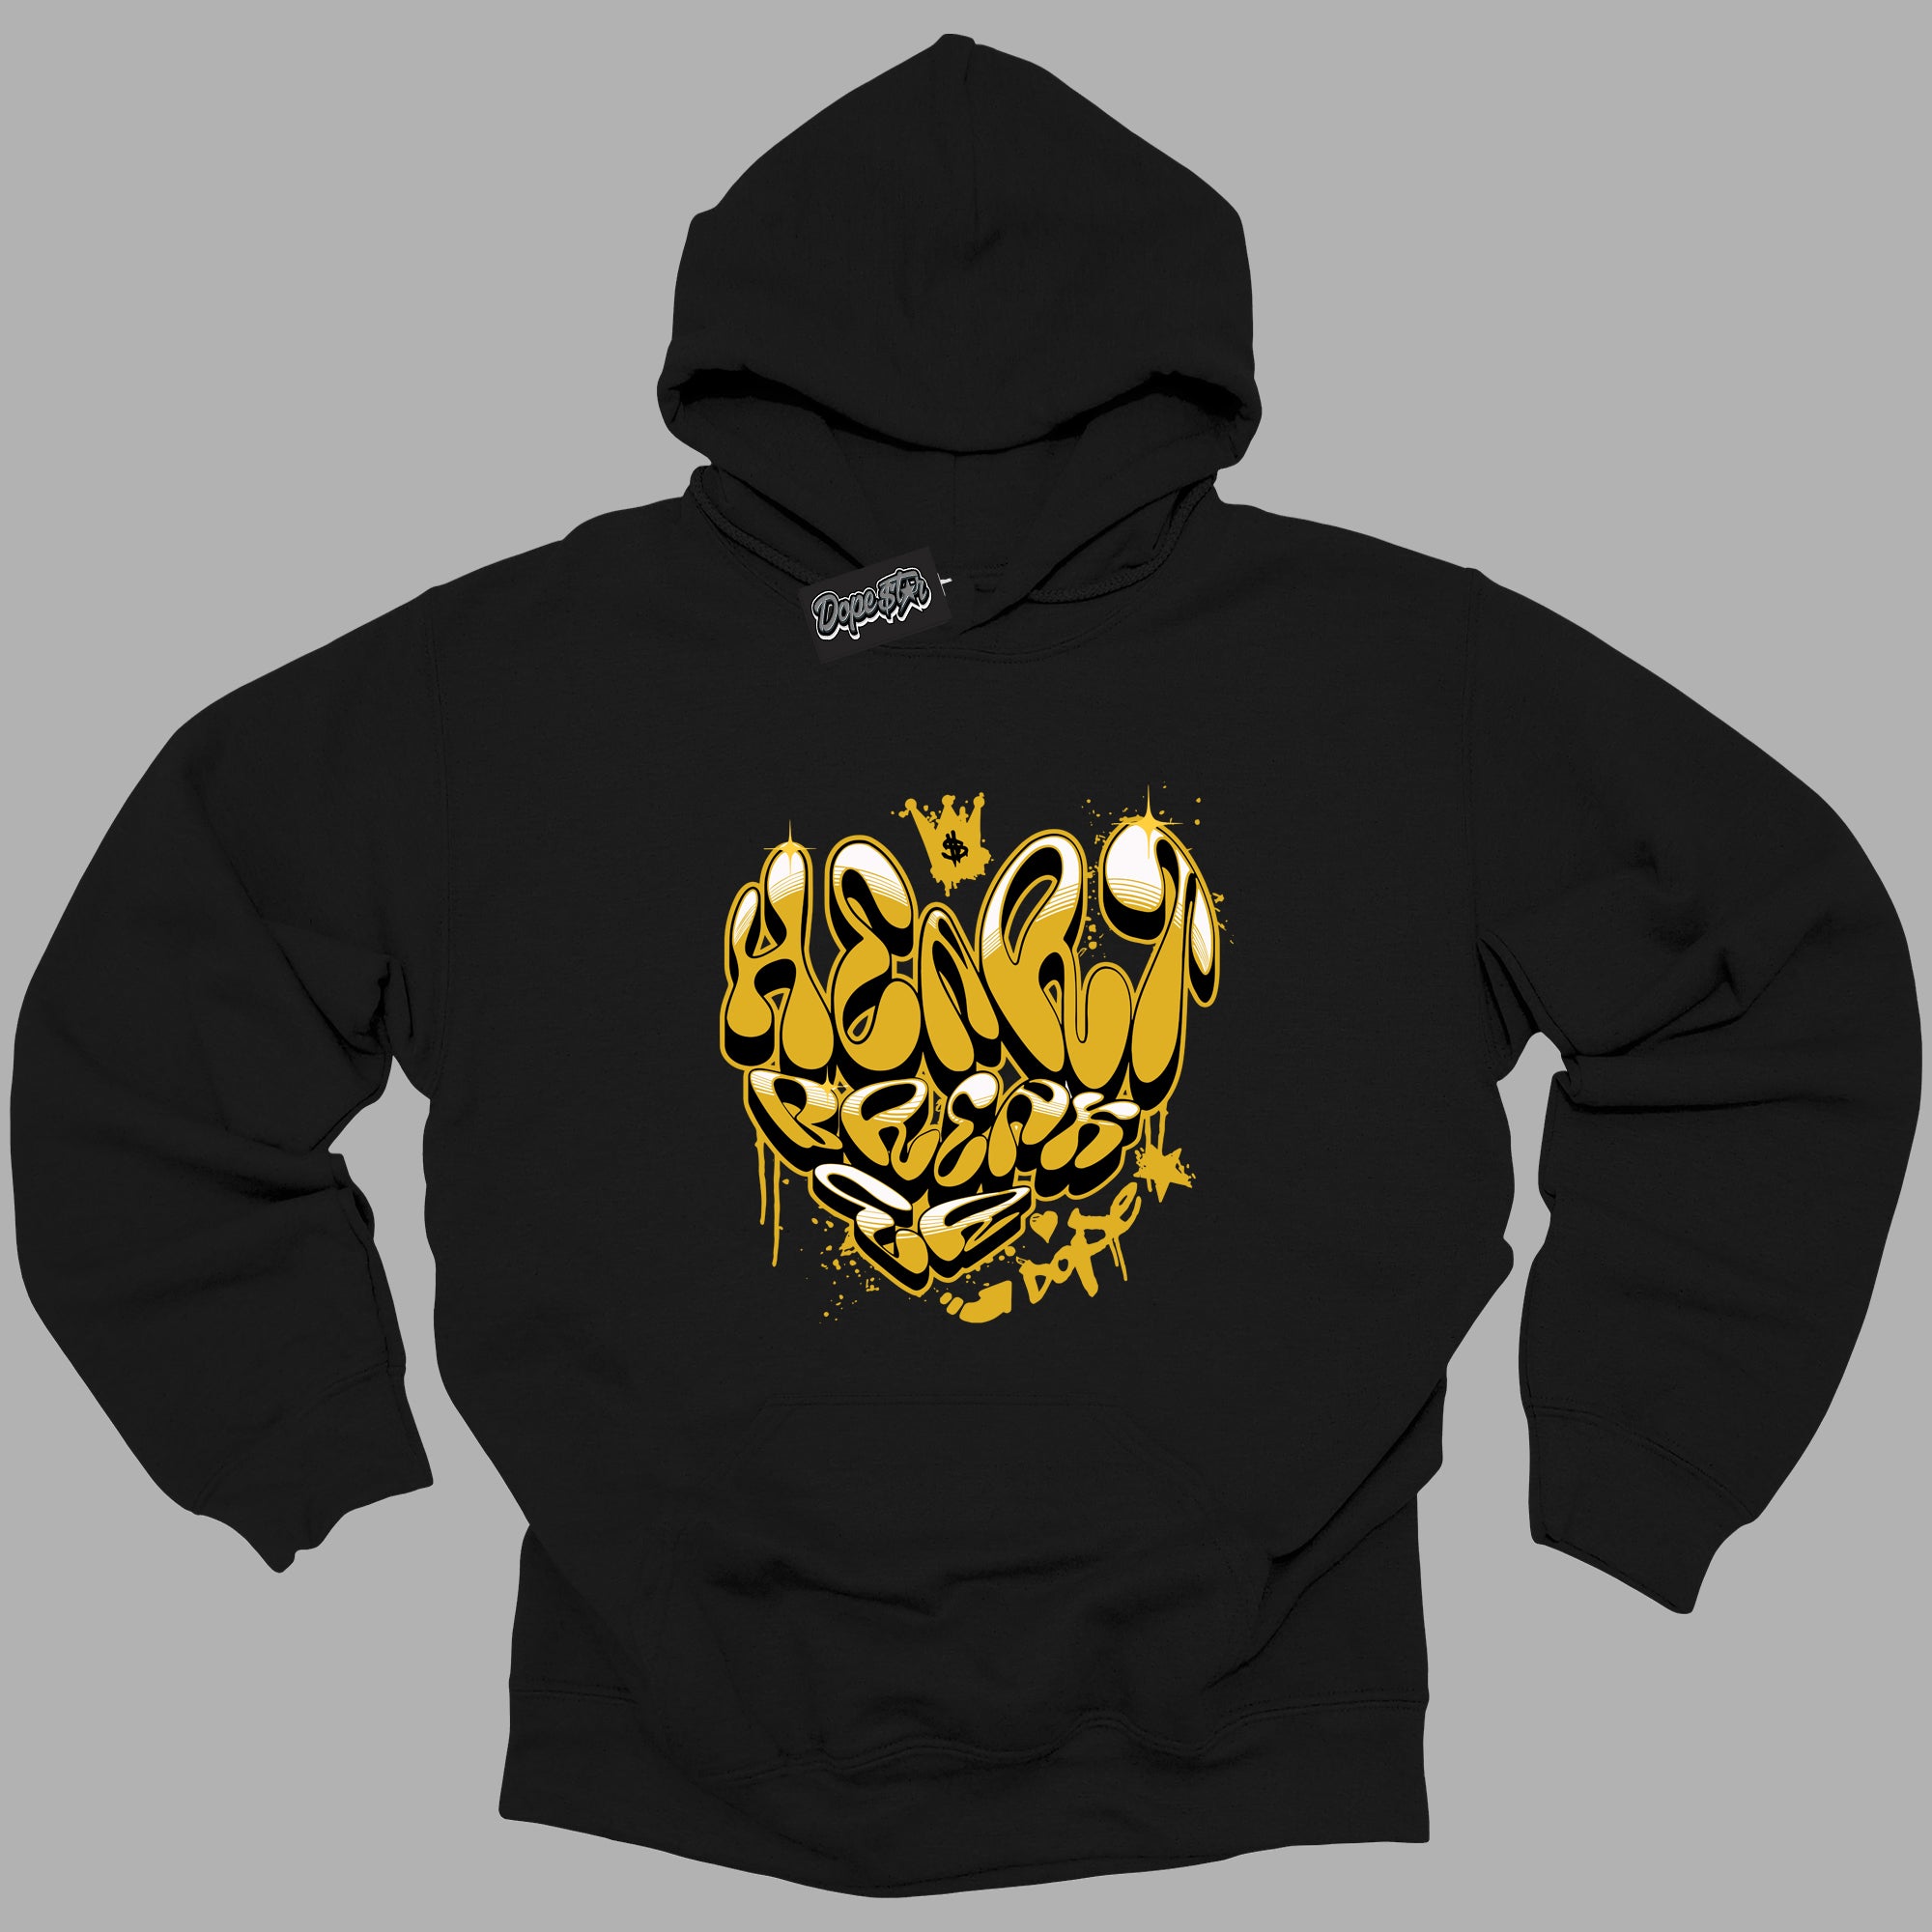 Cool Black Hoodie with “ Heartbreaker Graffiti ”  design that Perfectly Matches Yellow Ochre 6s Sneakers.